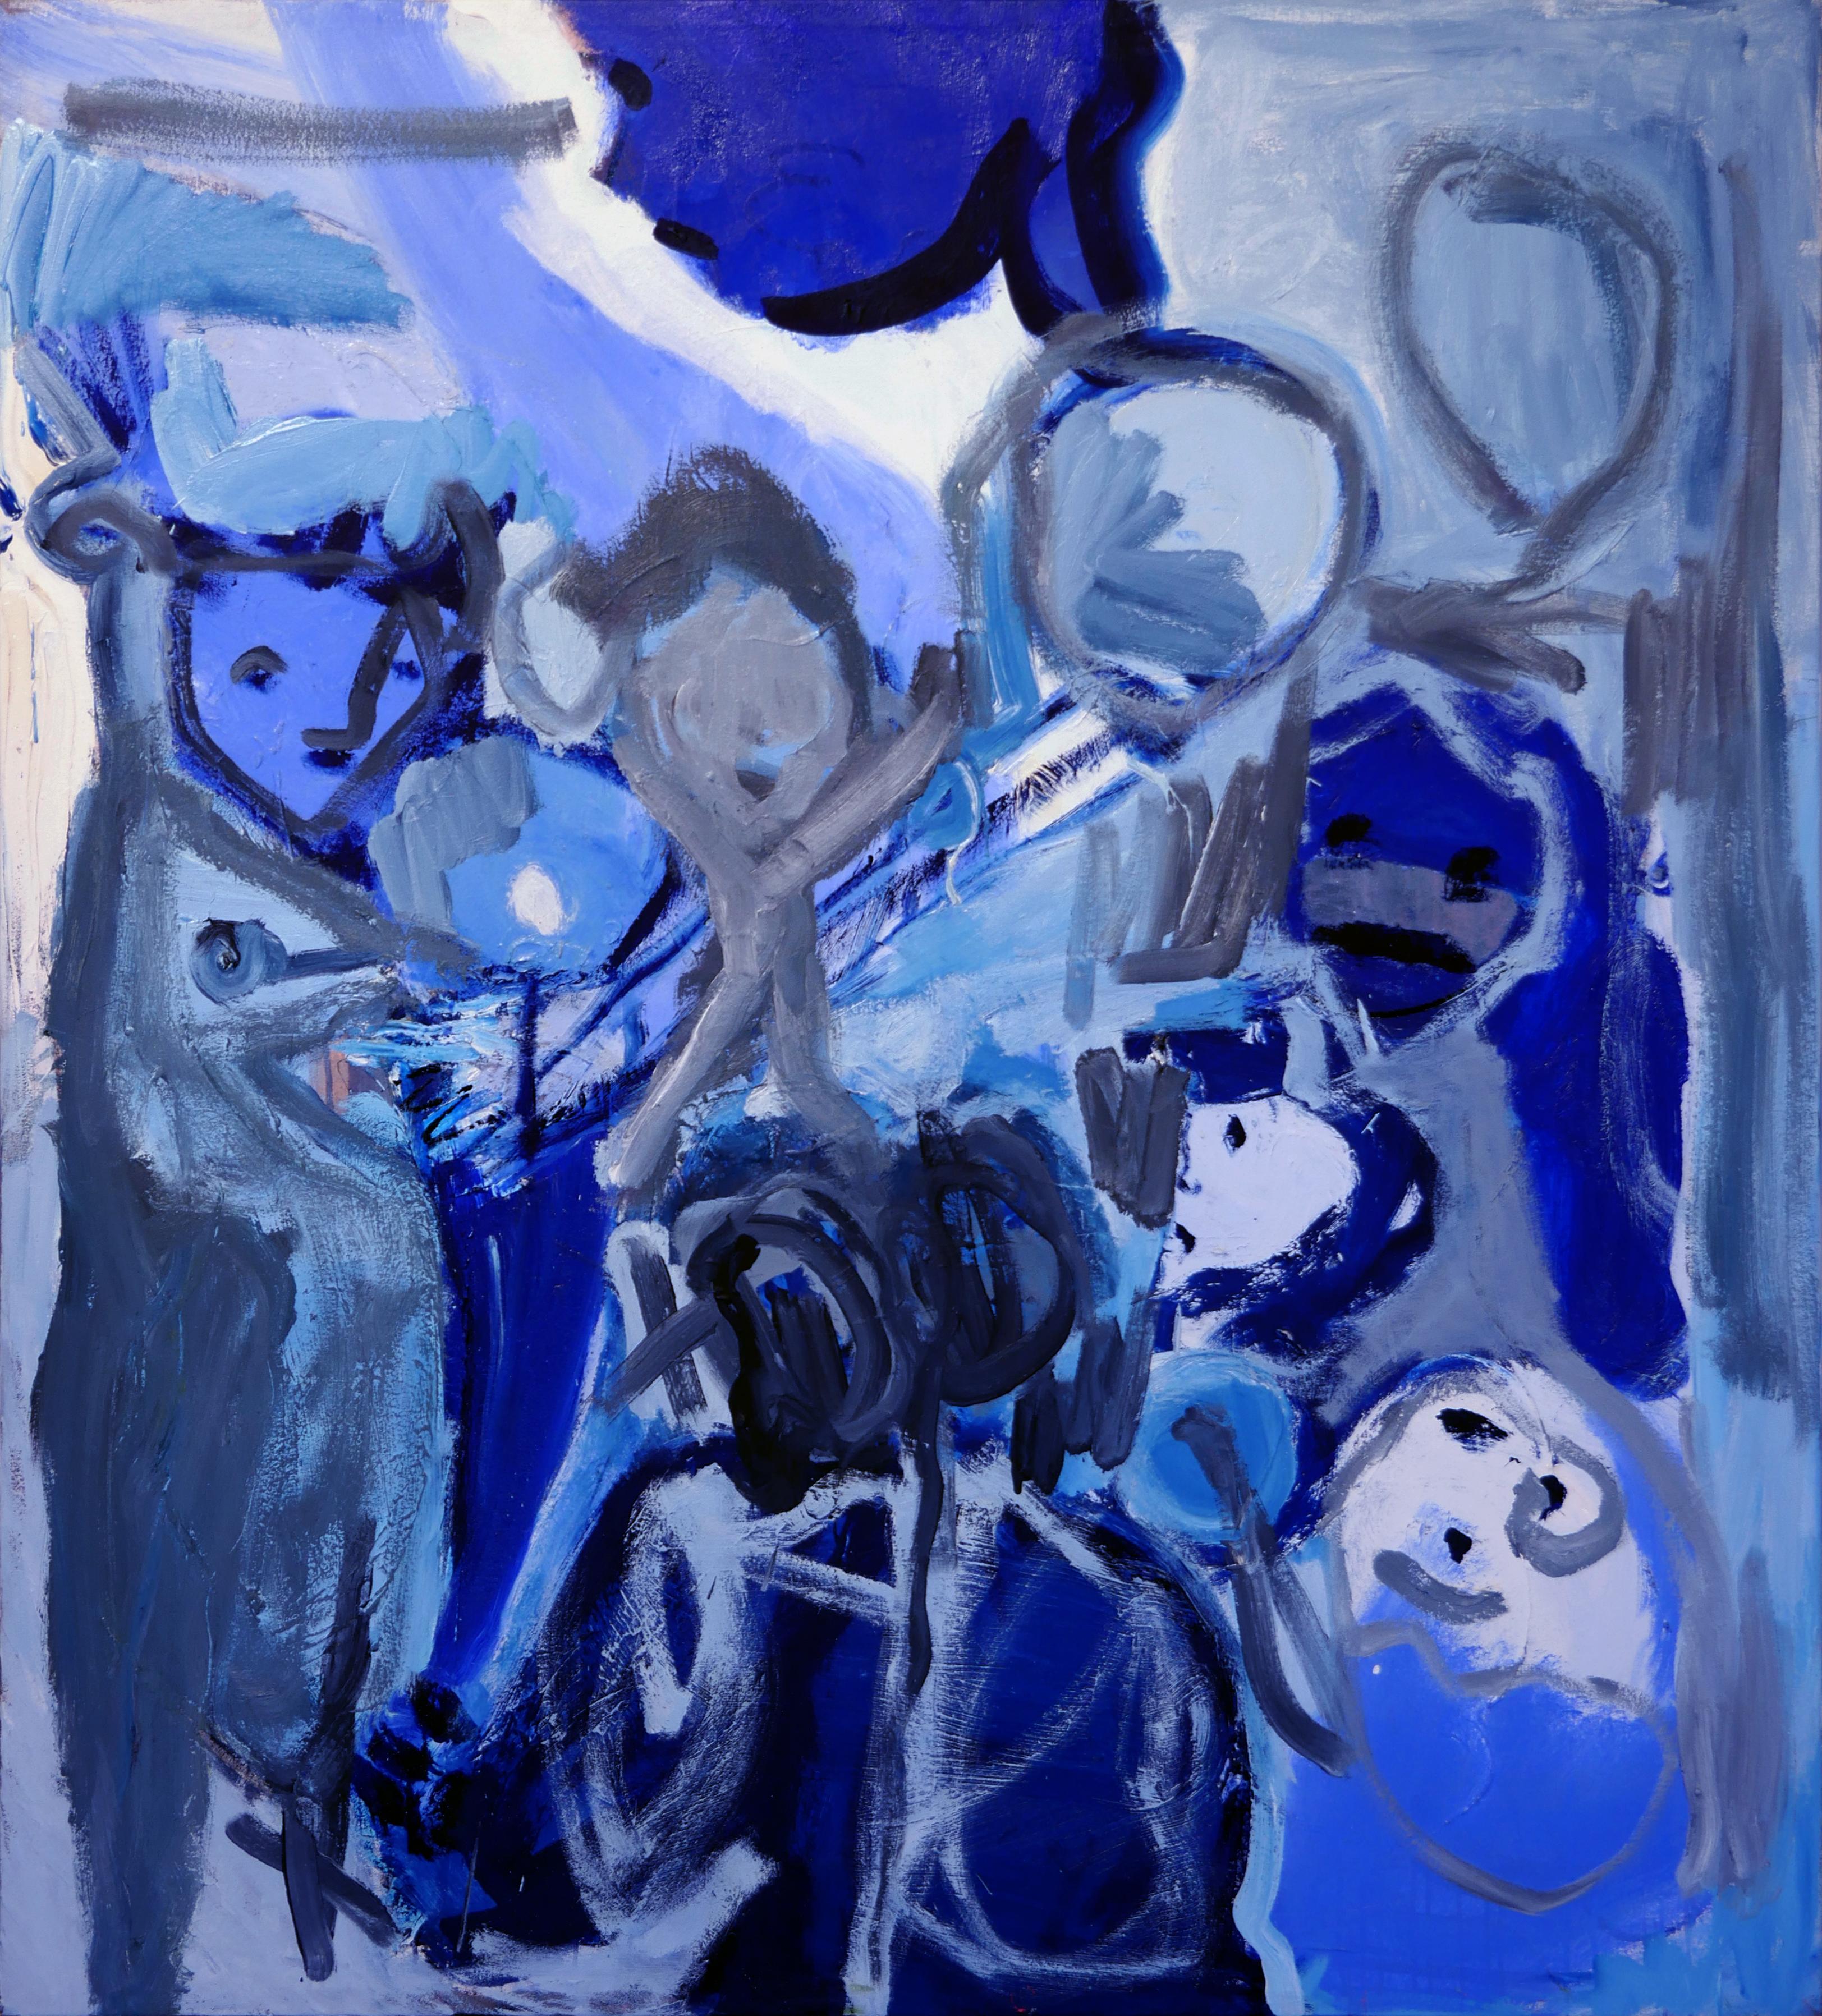 Tod Bailey Abstract Painting - "Blue Melt" Contemporary Abstract Expressionist Blue Toned Painting